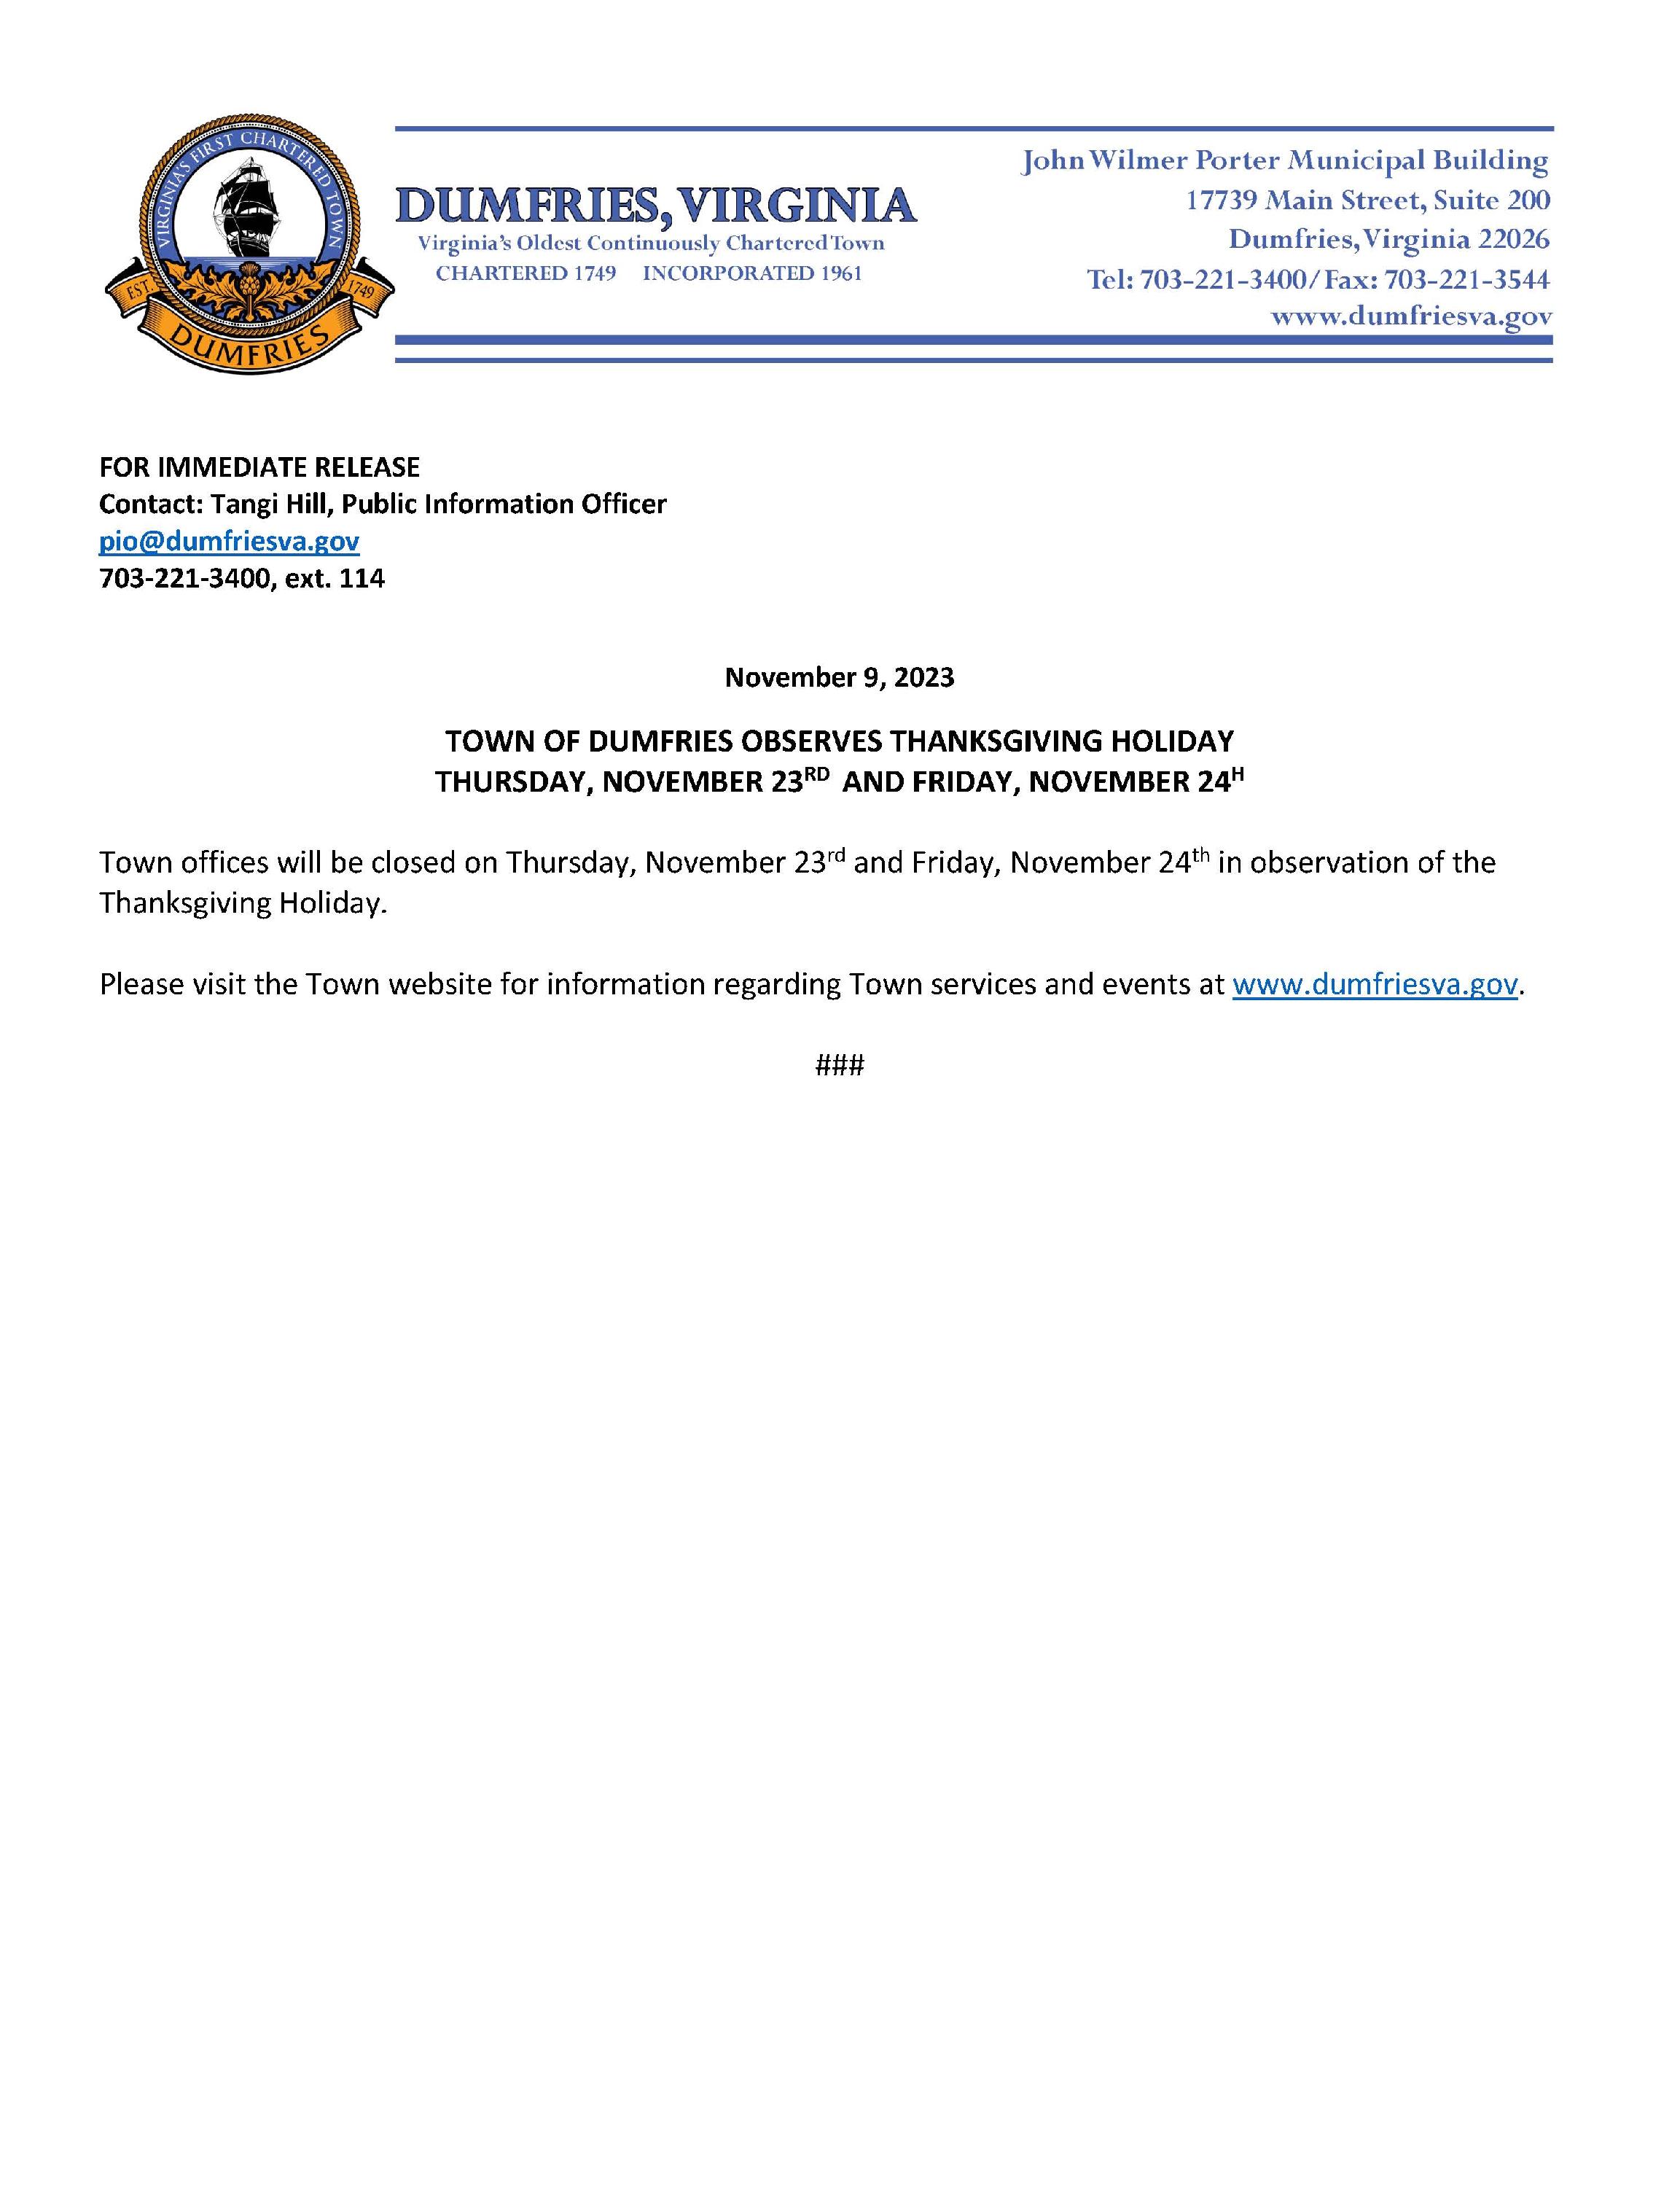 Thanksgiving Holiday Media Release